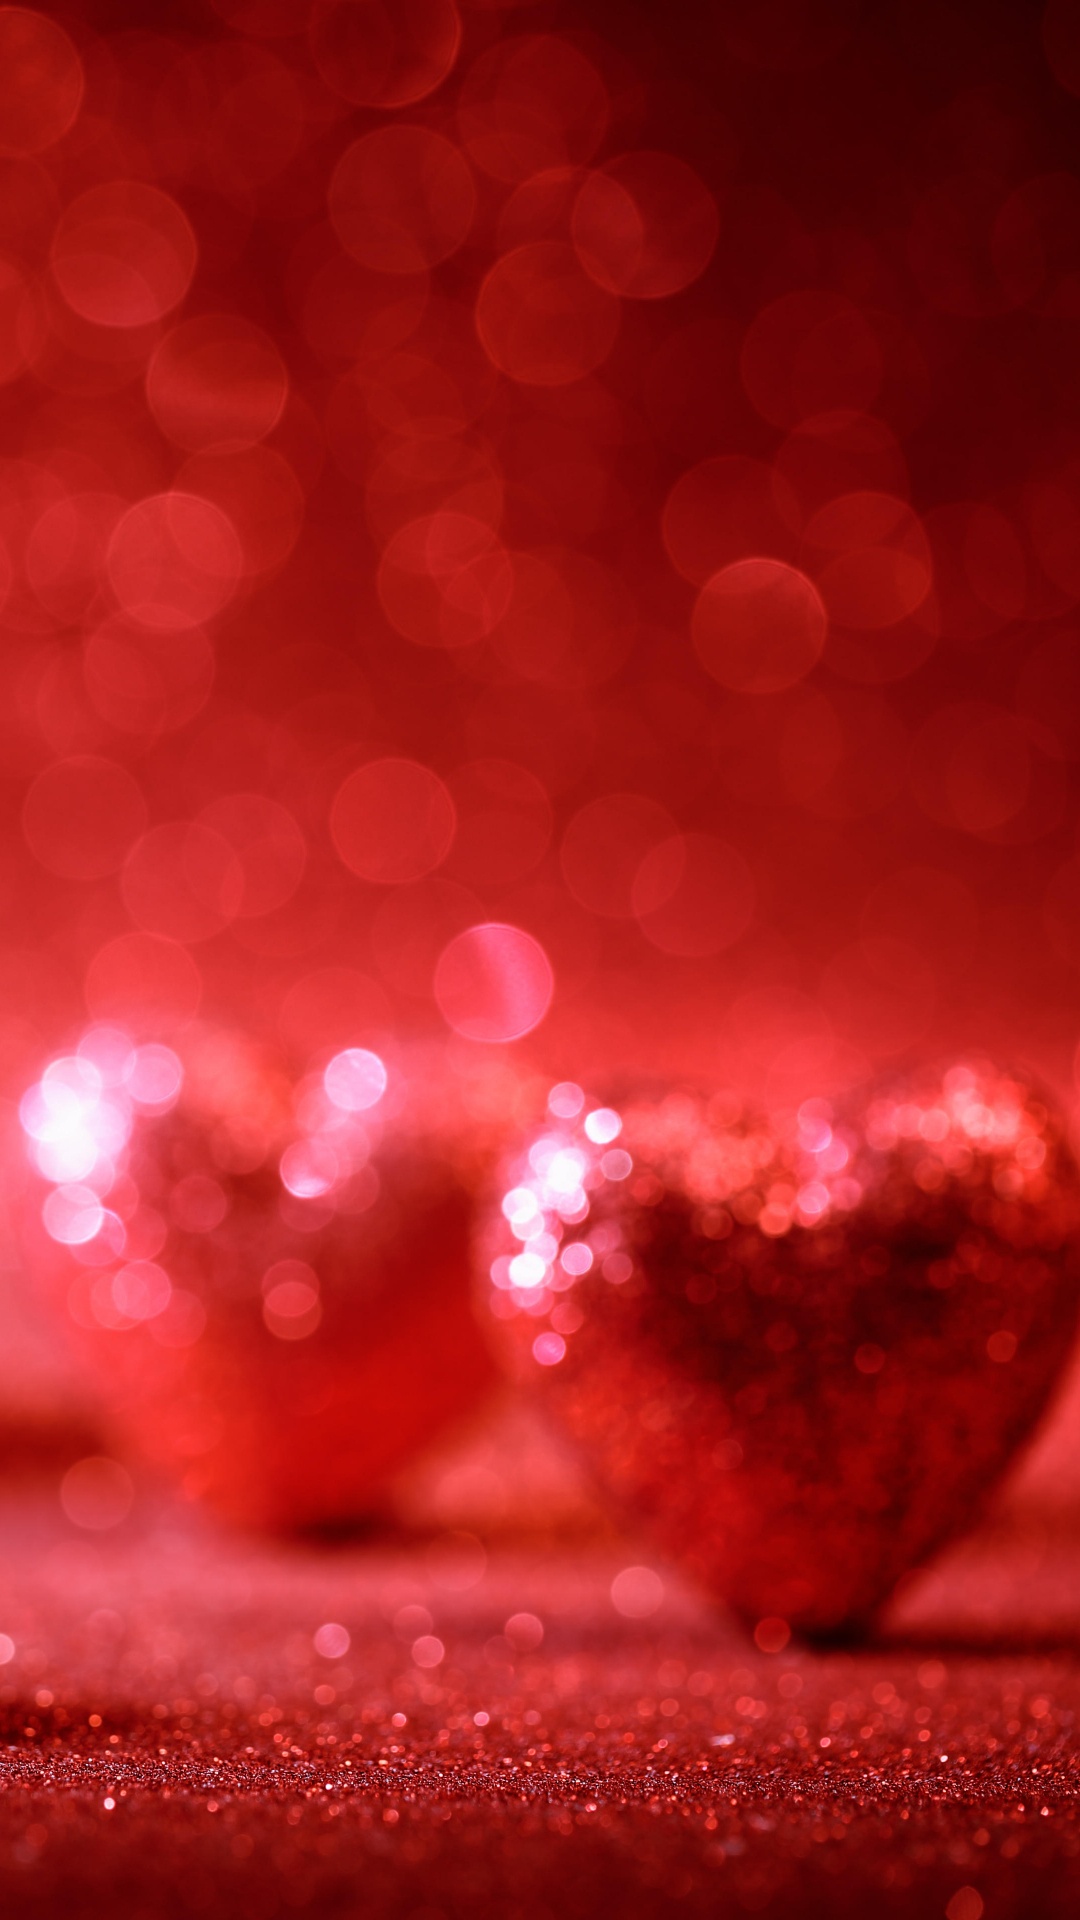 Valentines Day, Heart, Red, Love, Romance. Wallpaper in 1080x1920 Resolution